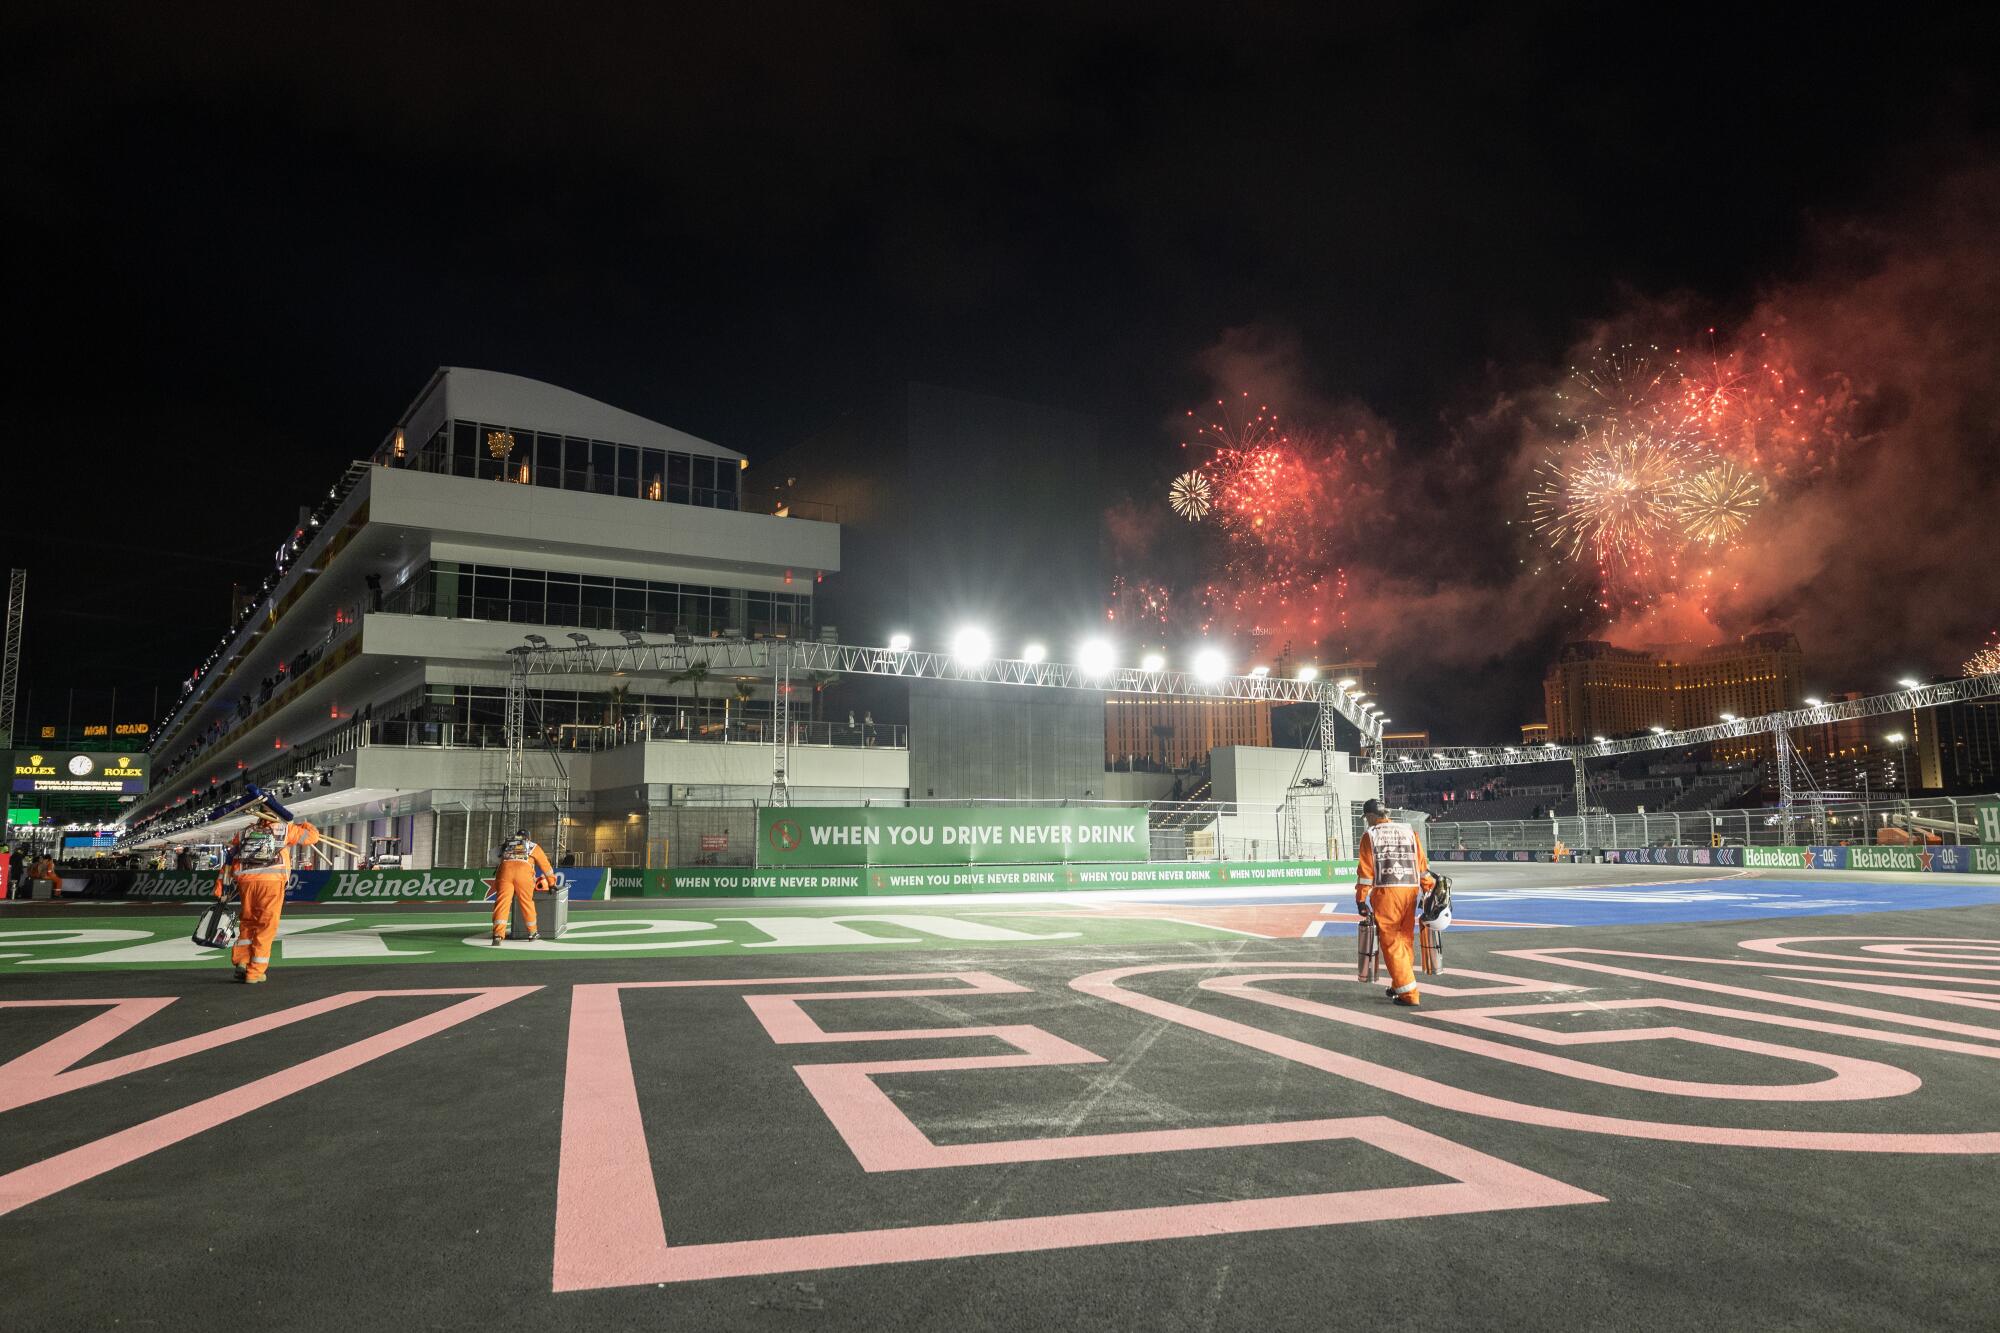 The Las Vegas Grand Prix closes with fireworks over the track early Sunday morning.